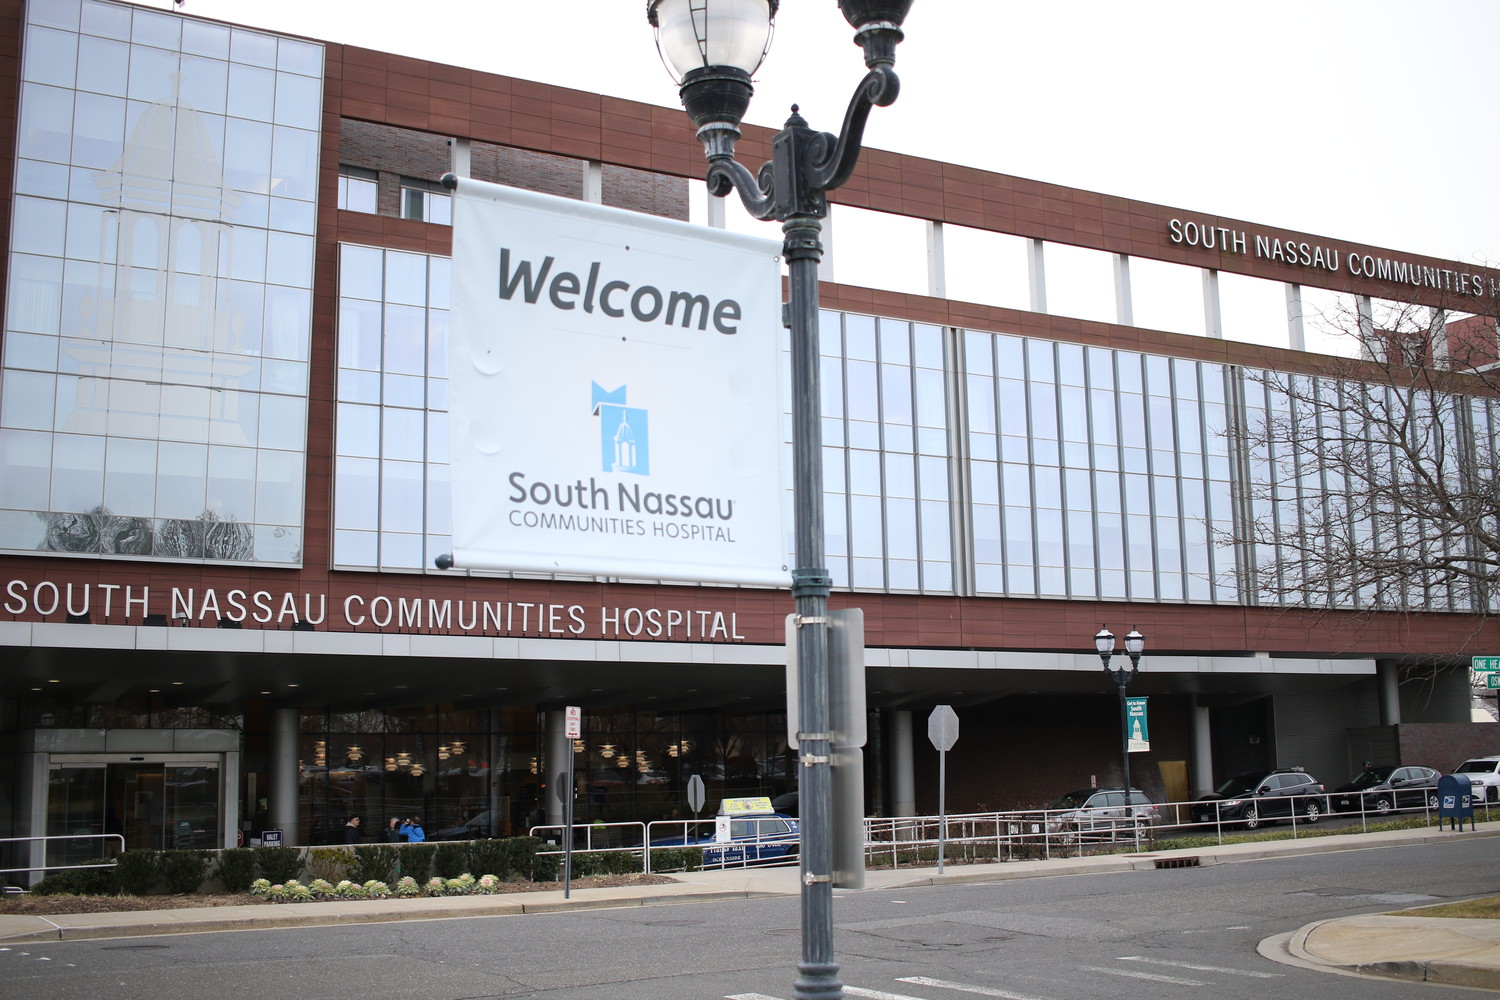 South Nassau Communities Hospital was named a leading center for orthopedic surgery by Healthgrades, one of the many accolades the hospital received in 2017.